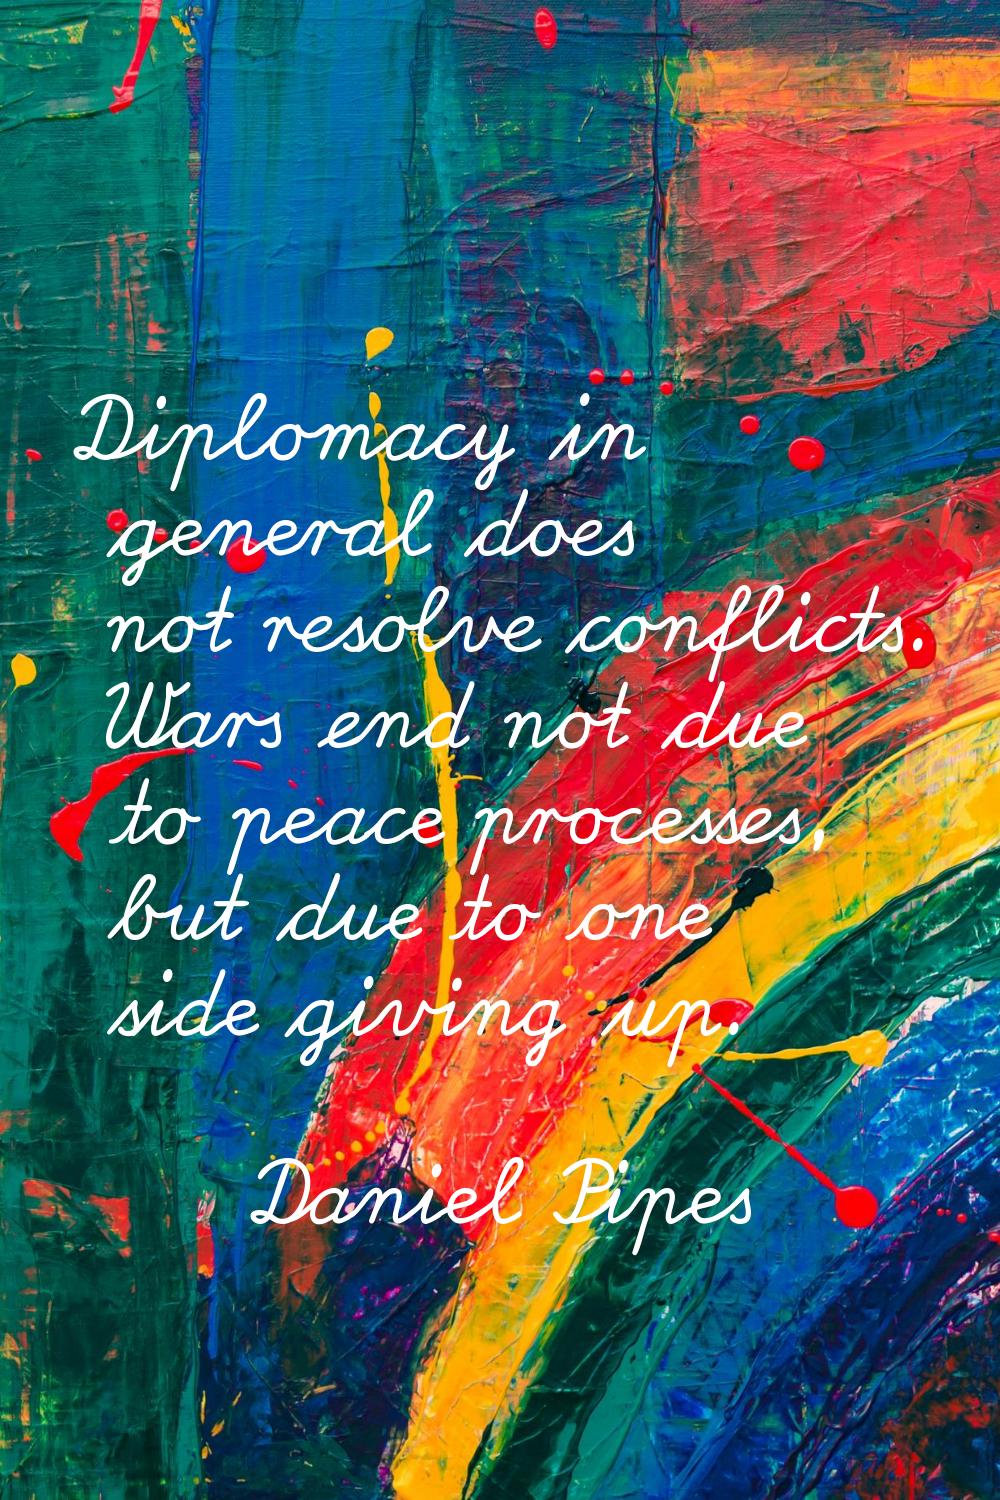 Diplomacy in general does not resolve conflicts. Wars end not due to peace processes, but due to on